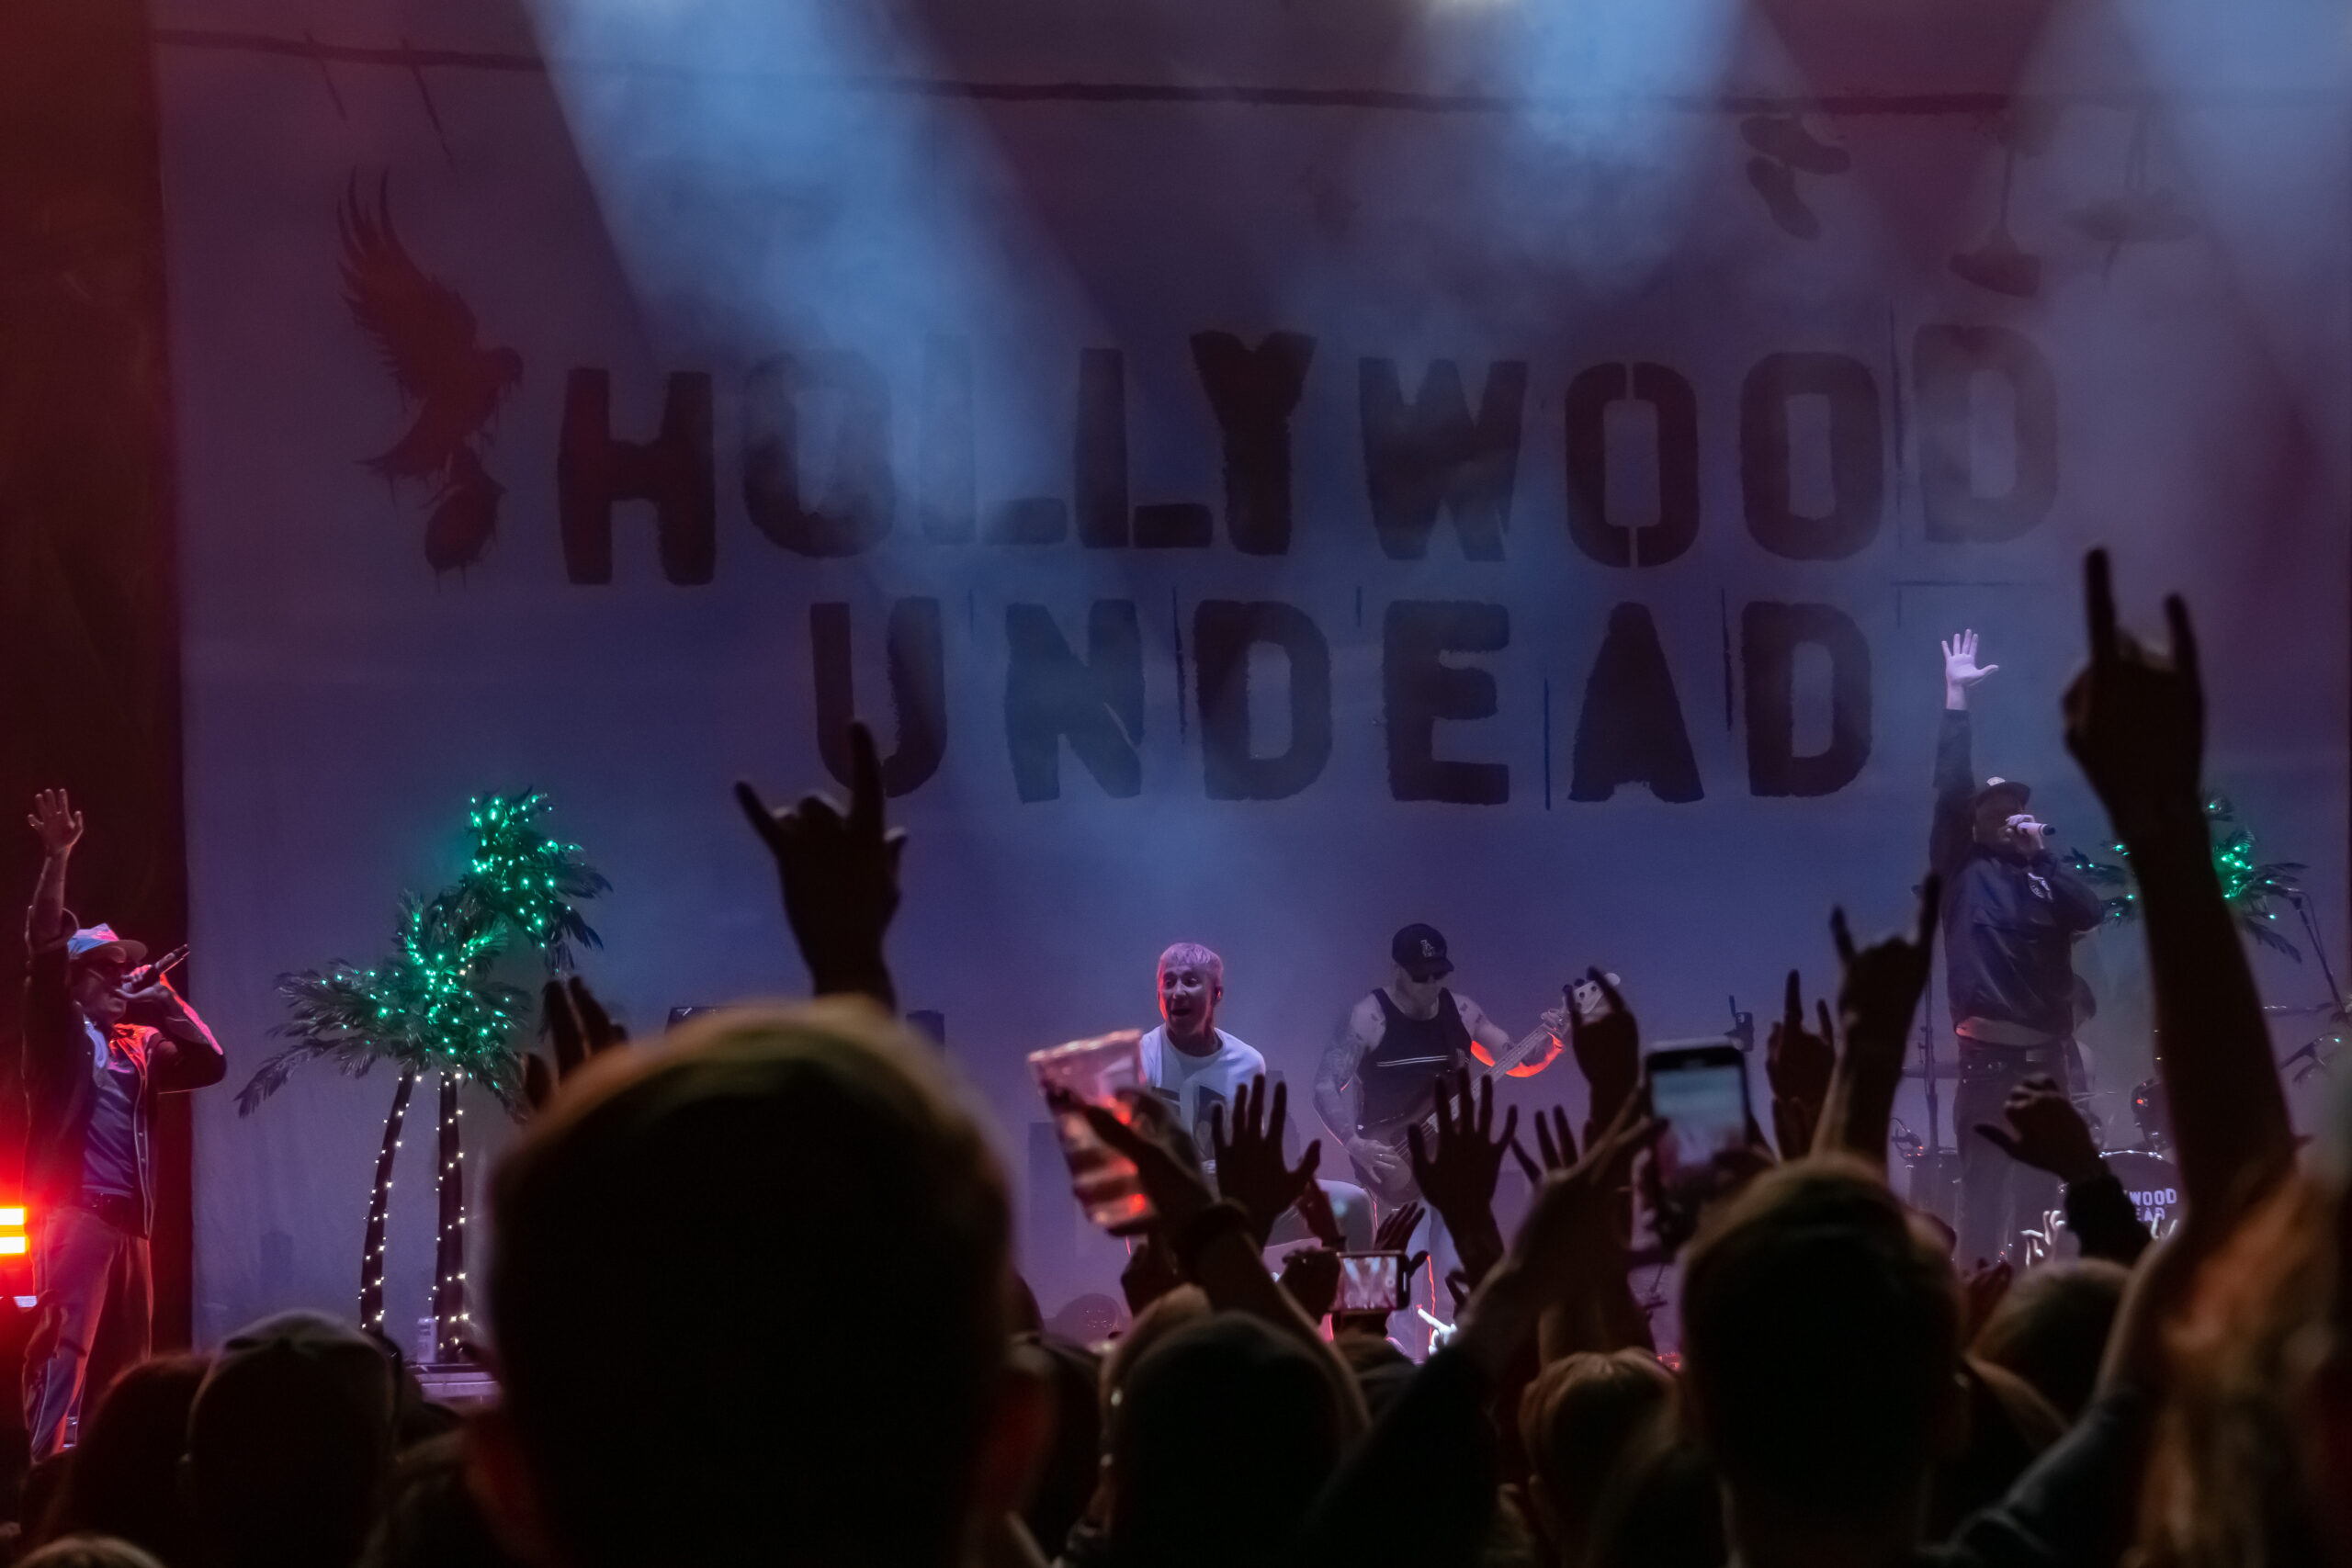 Hollywood Undead photo by Melody Staton for HM Magazine